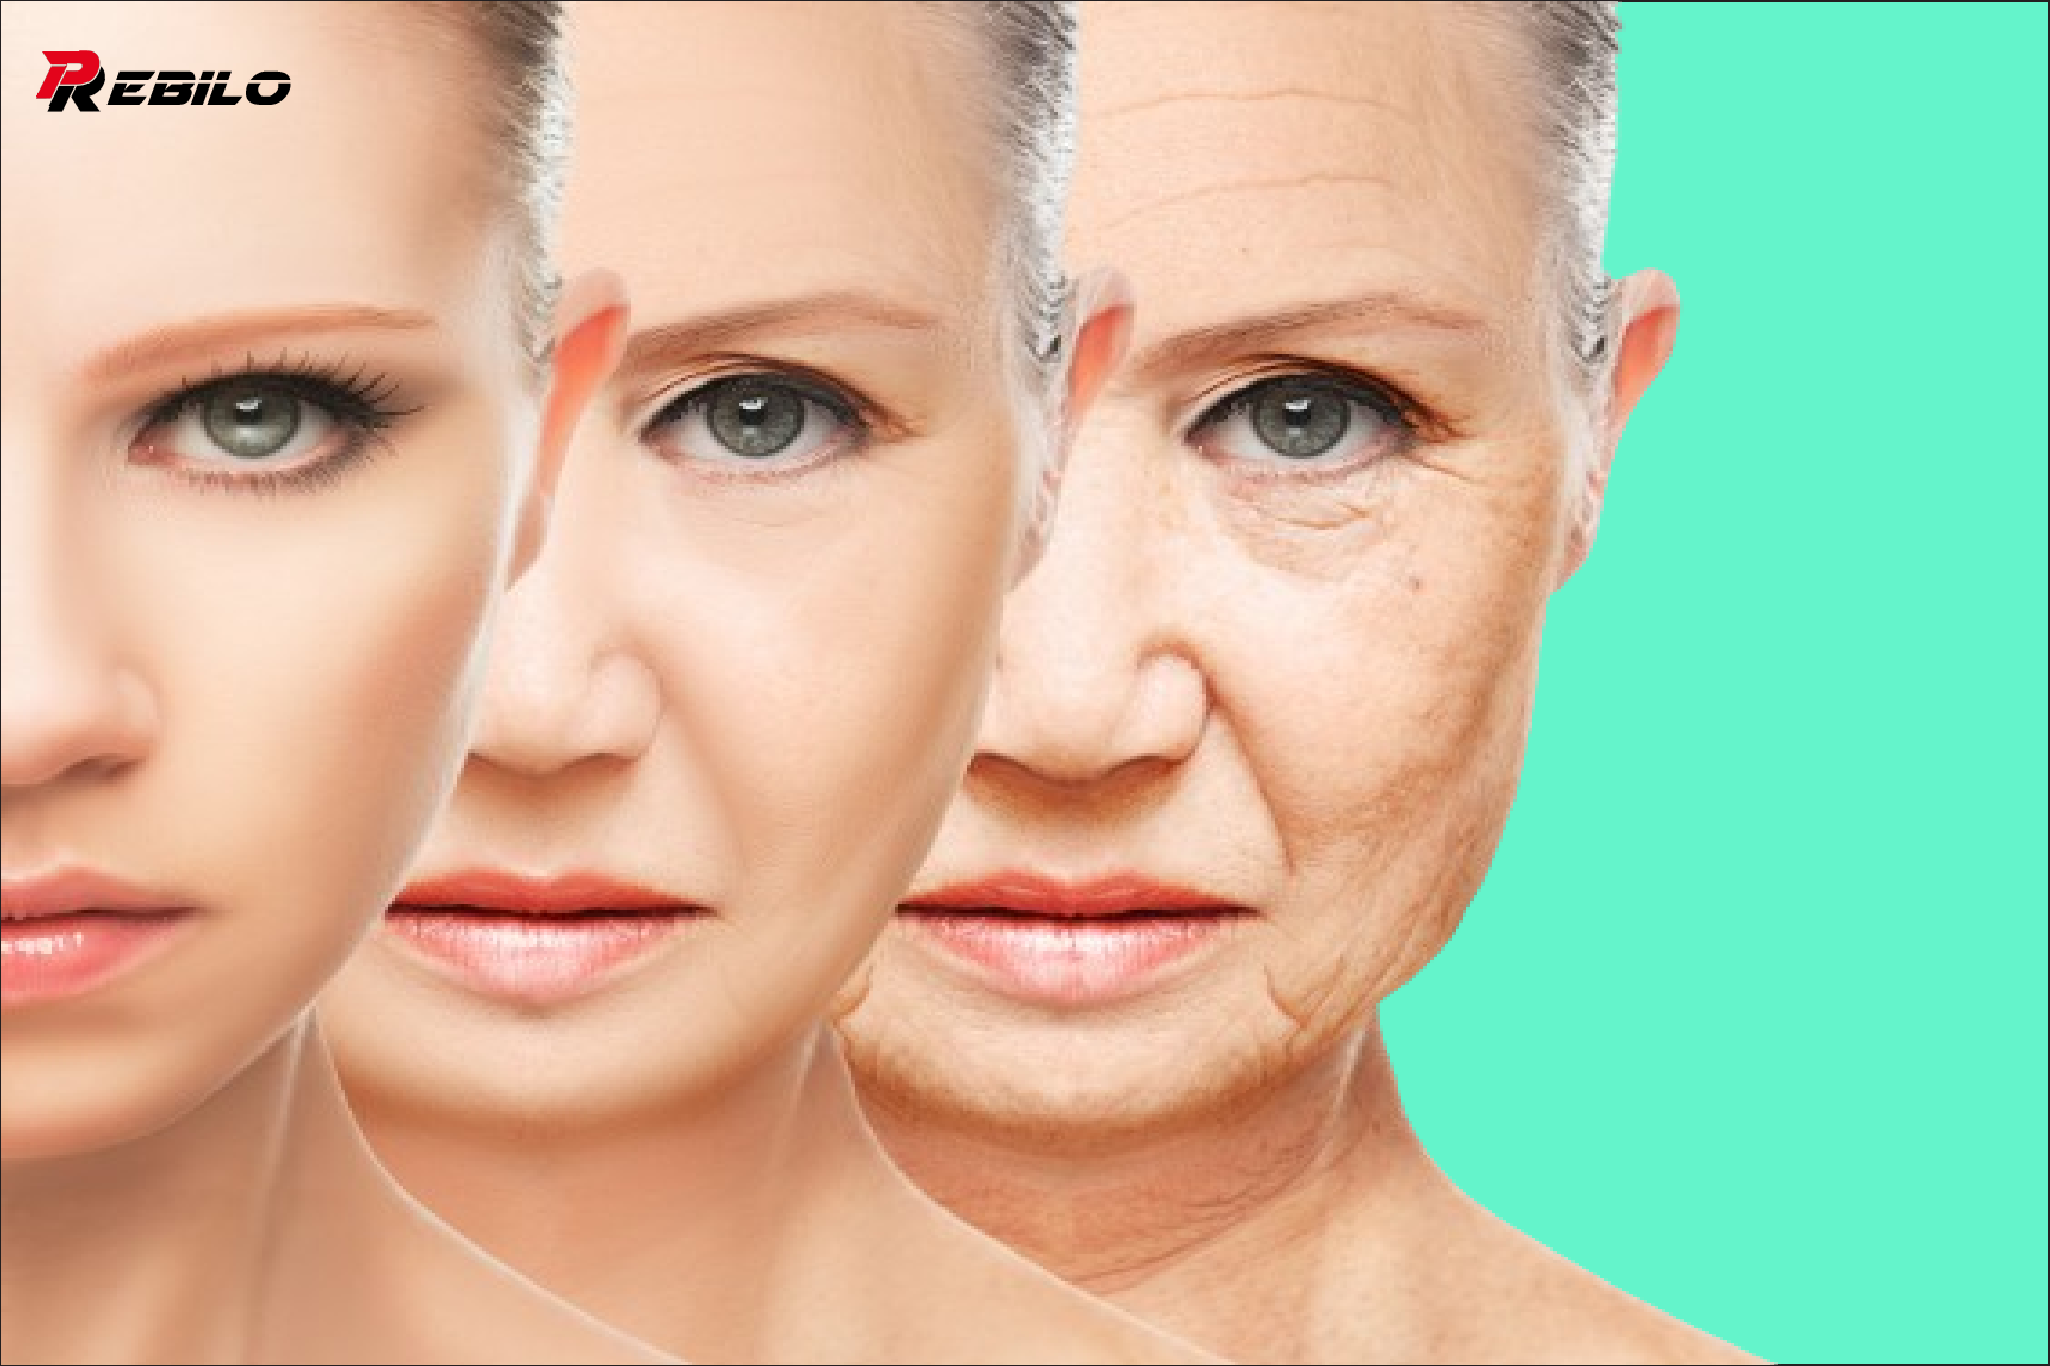 You only need two ingredients to get rid of sagging facial skin and wrinkles overnight